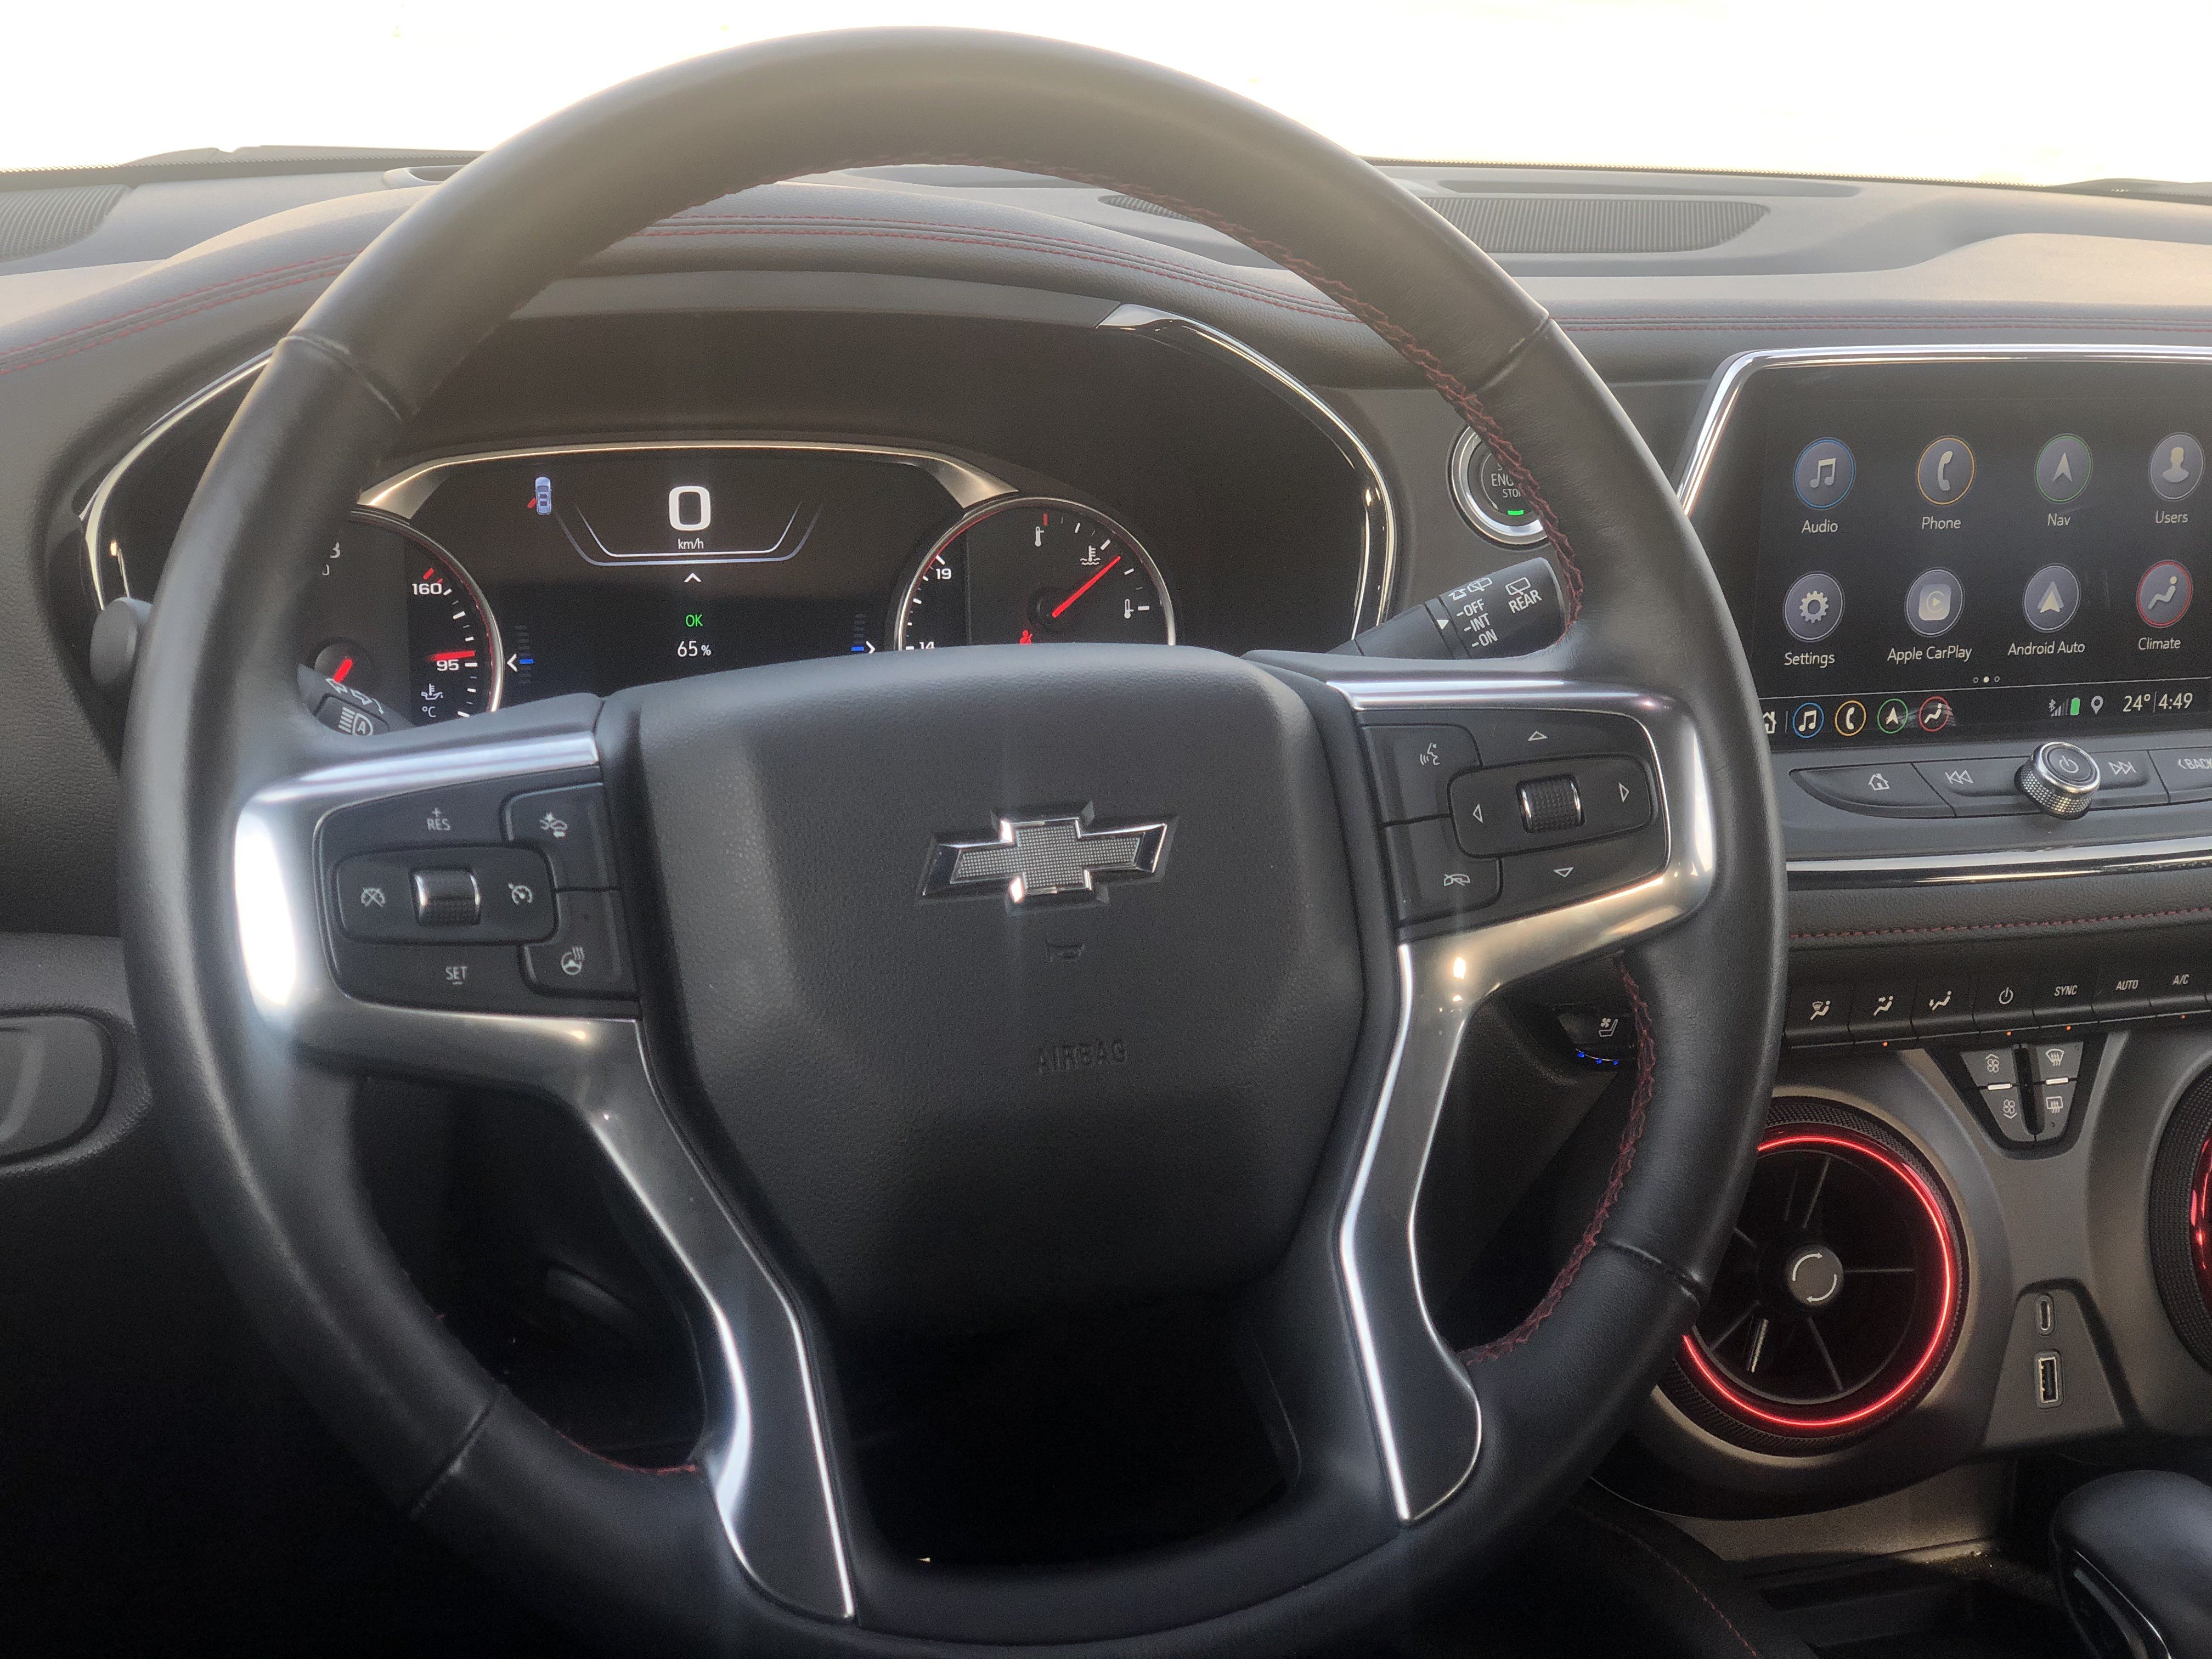 The steering is covered with soft leather providing you that conformable grip in making those quick corners. It also has several switches to answer calls, view the engine stats, and much more. The steering has a stiff damper installed, which is perfect for absorbing those shocks from bumpy roads.